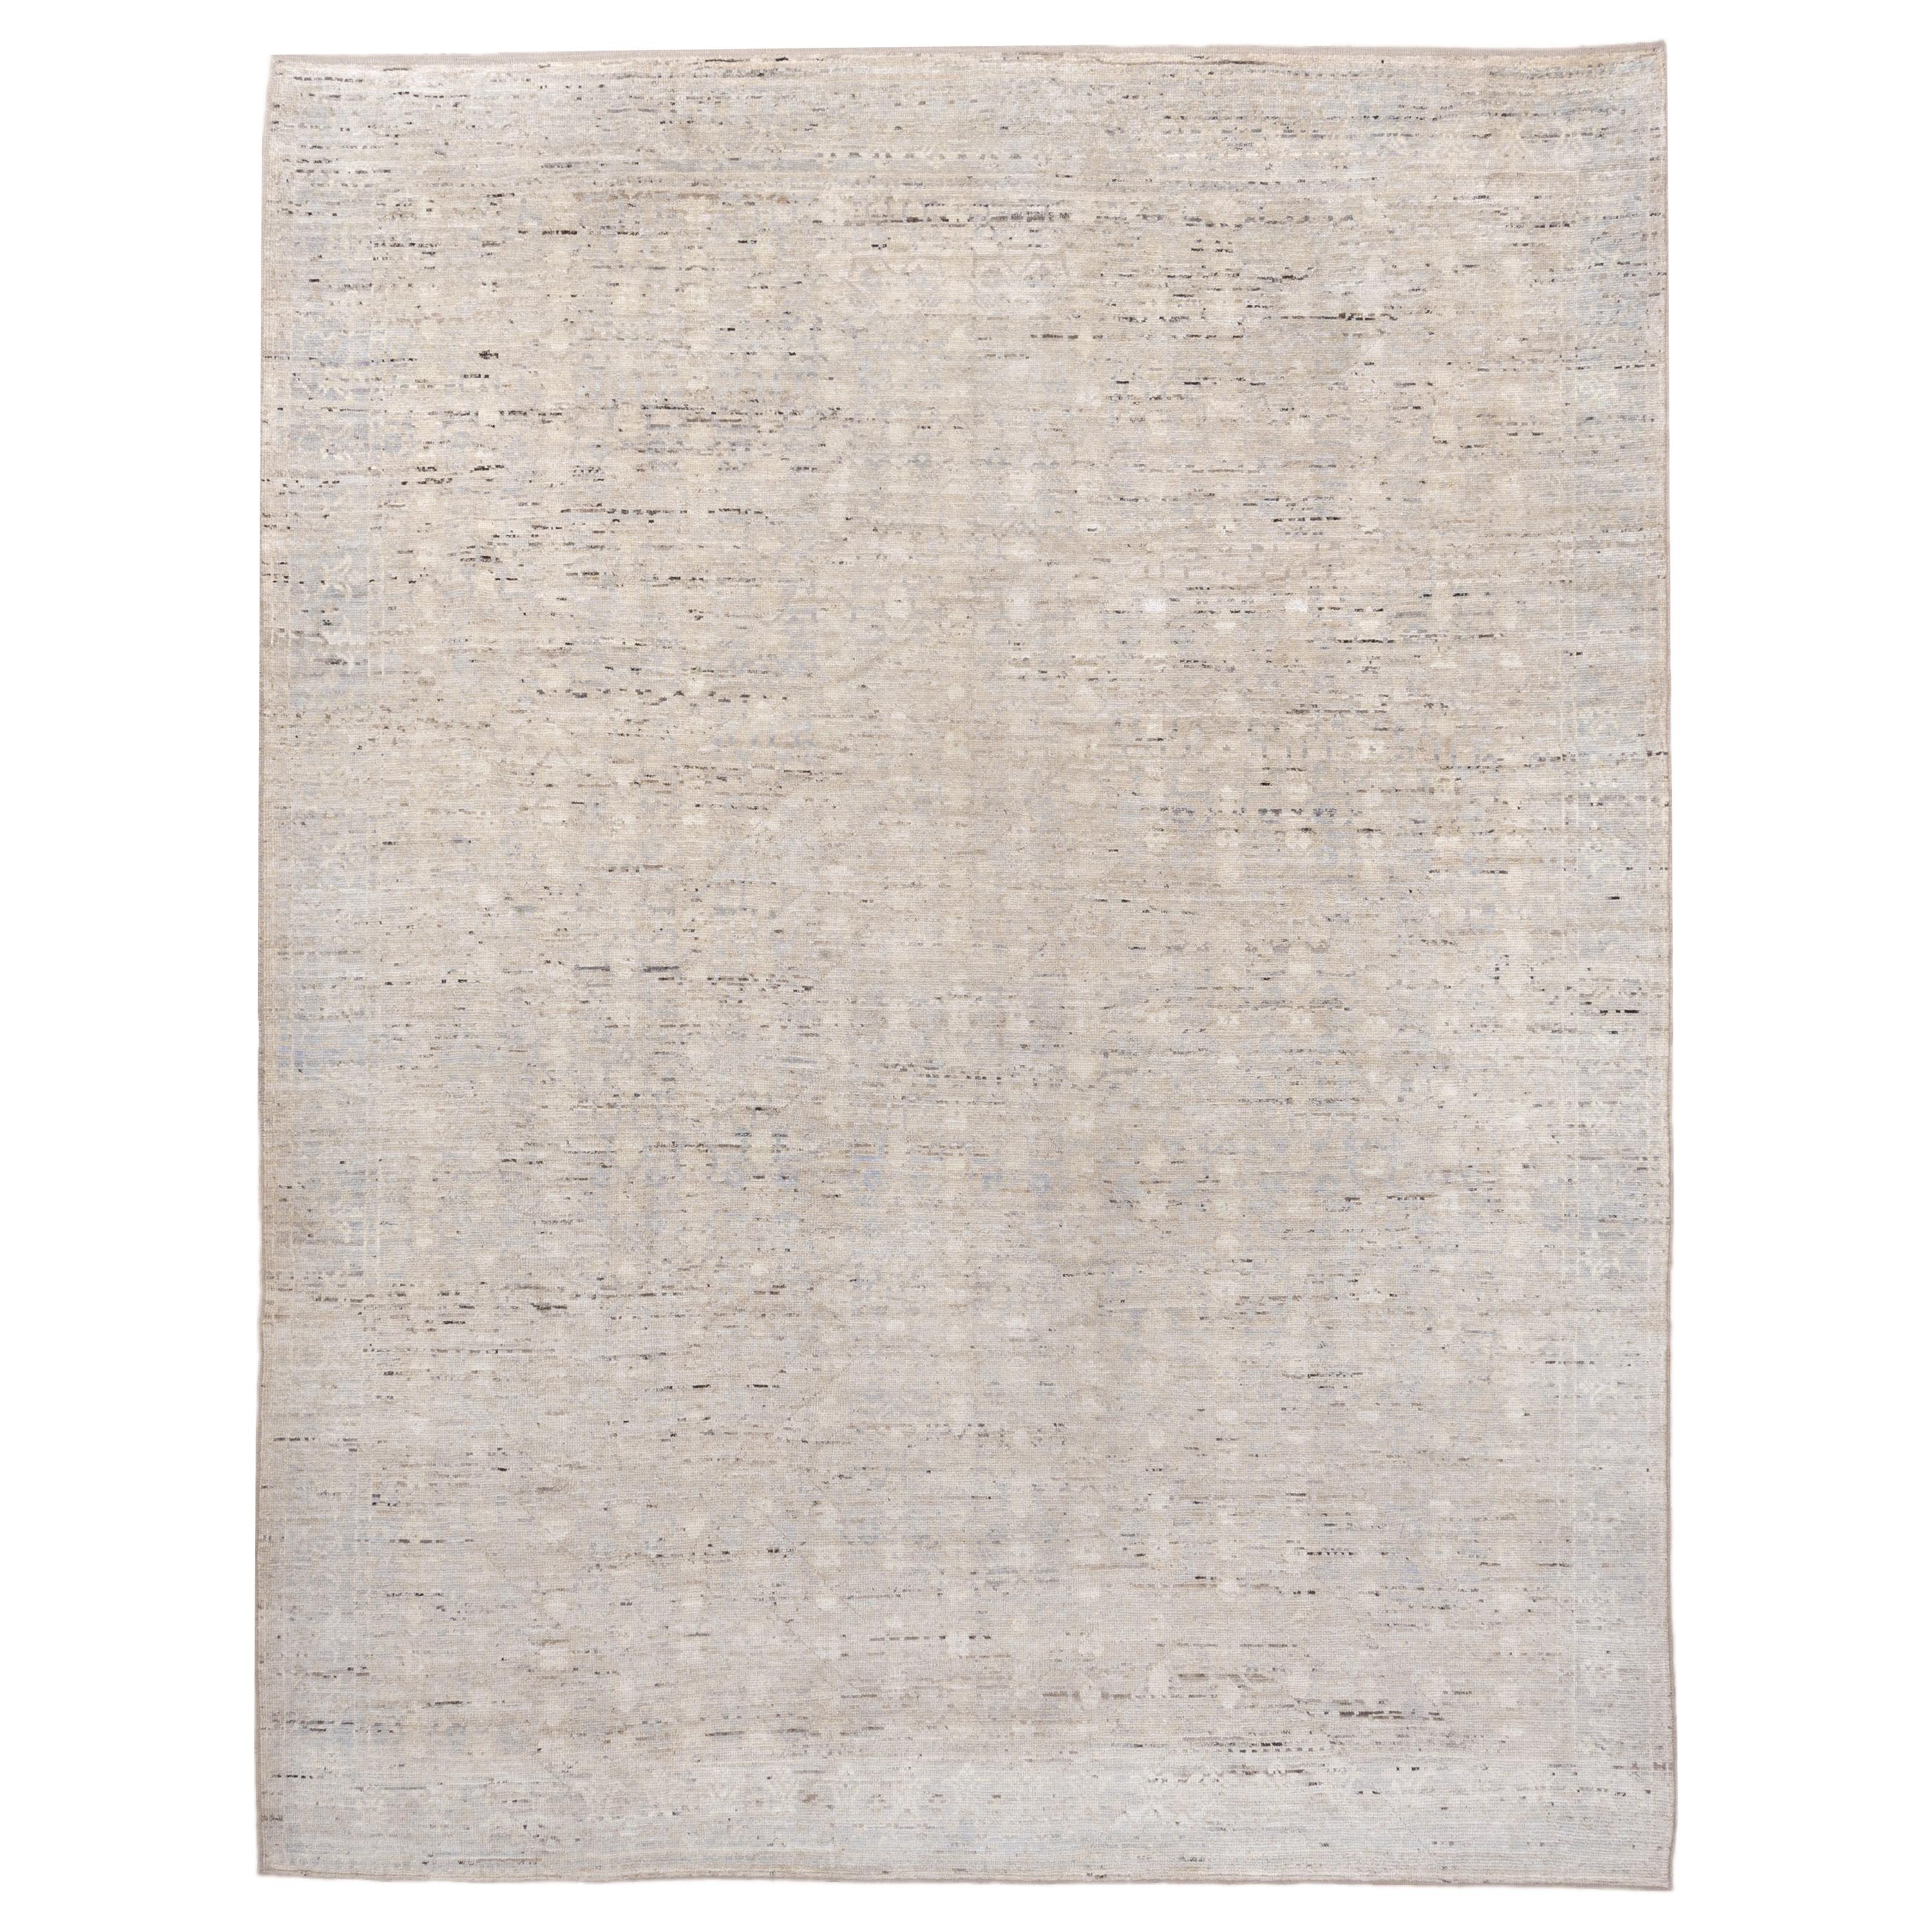 Modern Moroccan Style Rug, Linen and Baby Blue All-Over Field, Soft Medium Pile